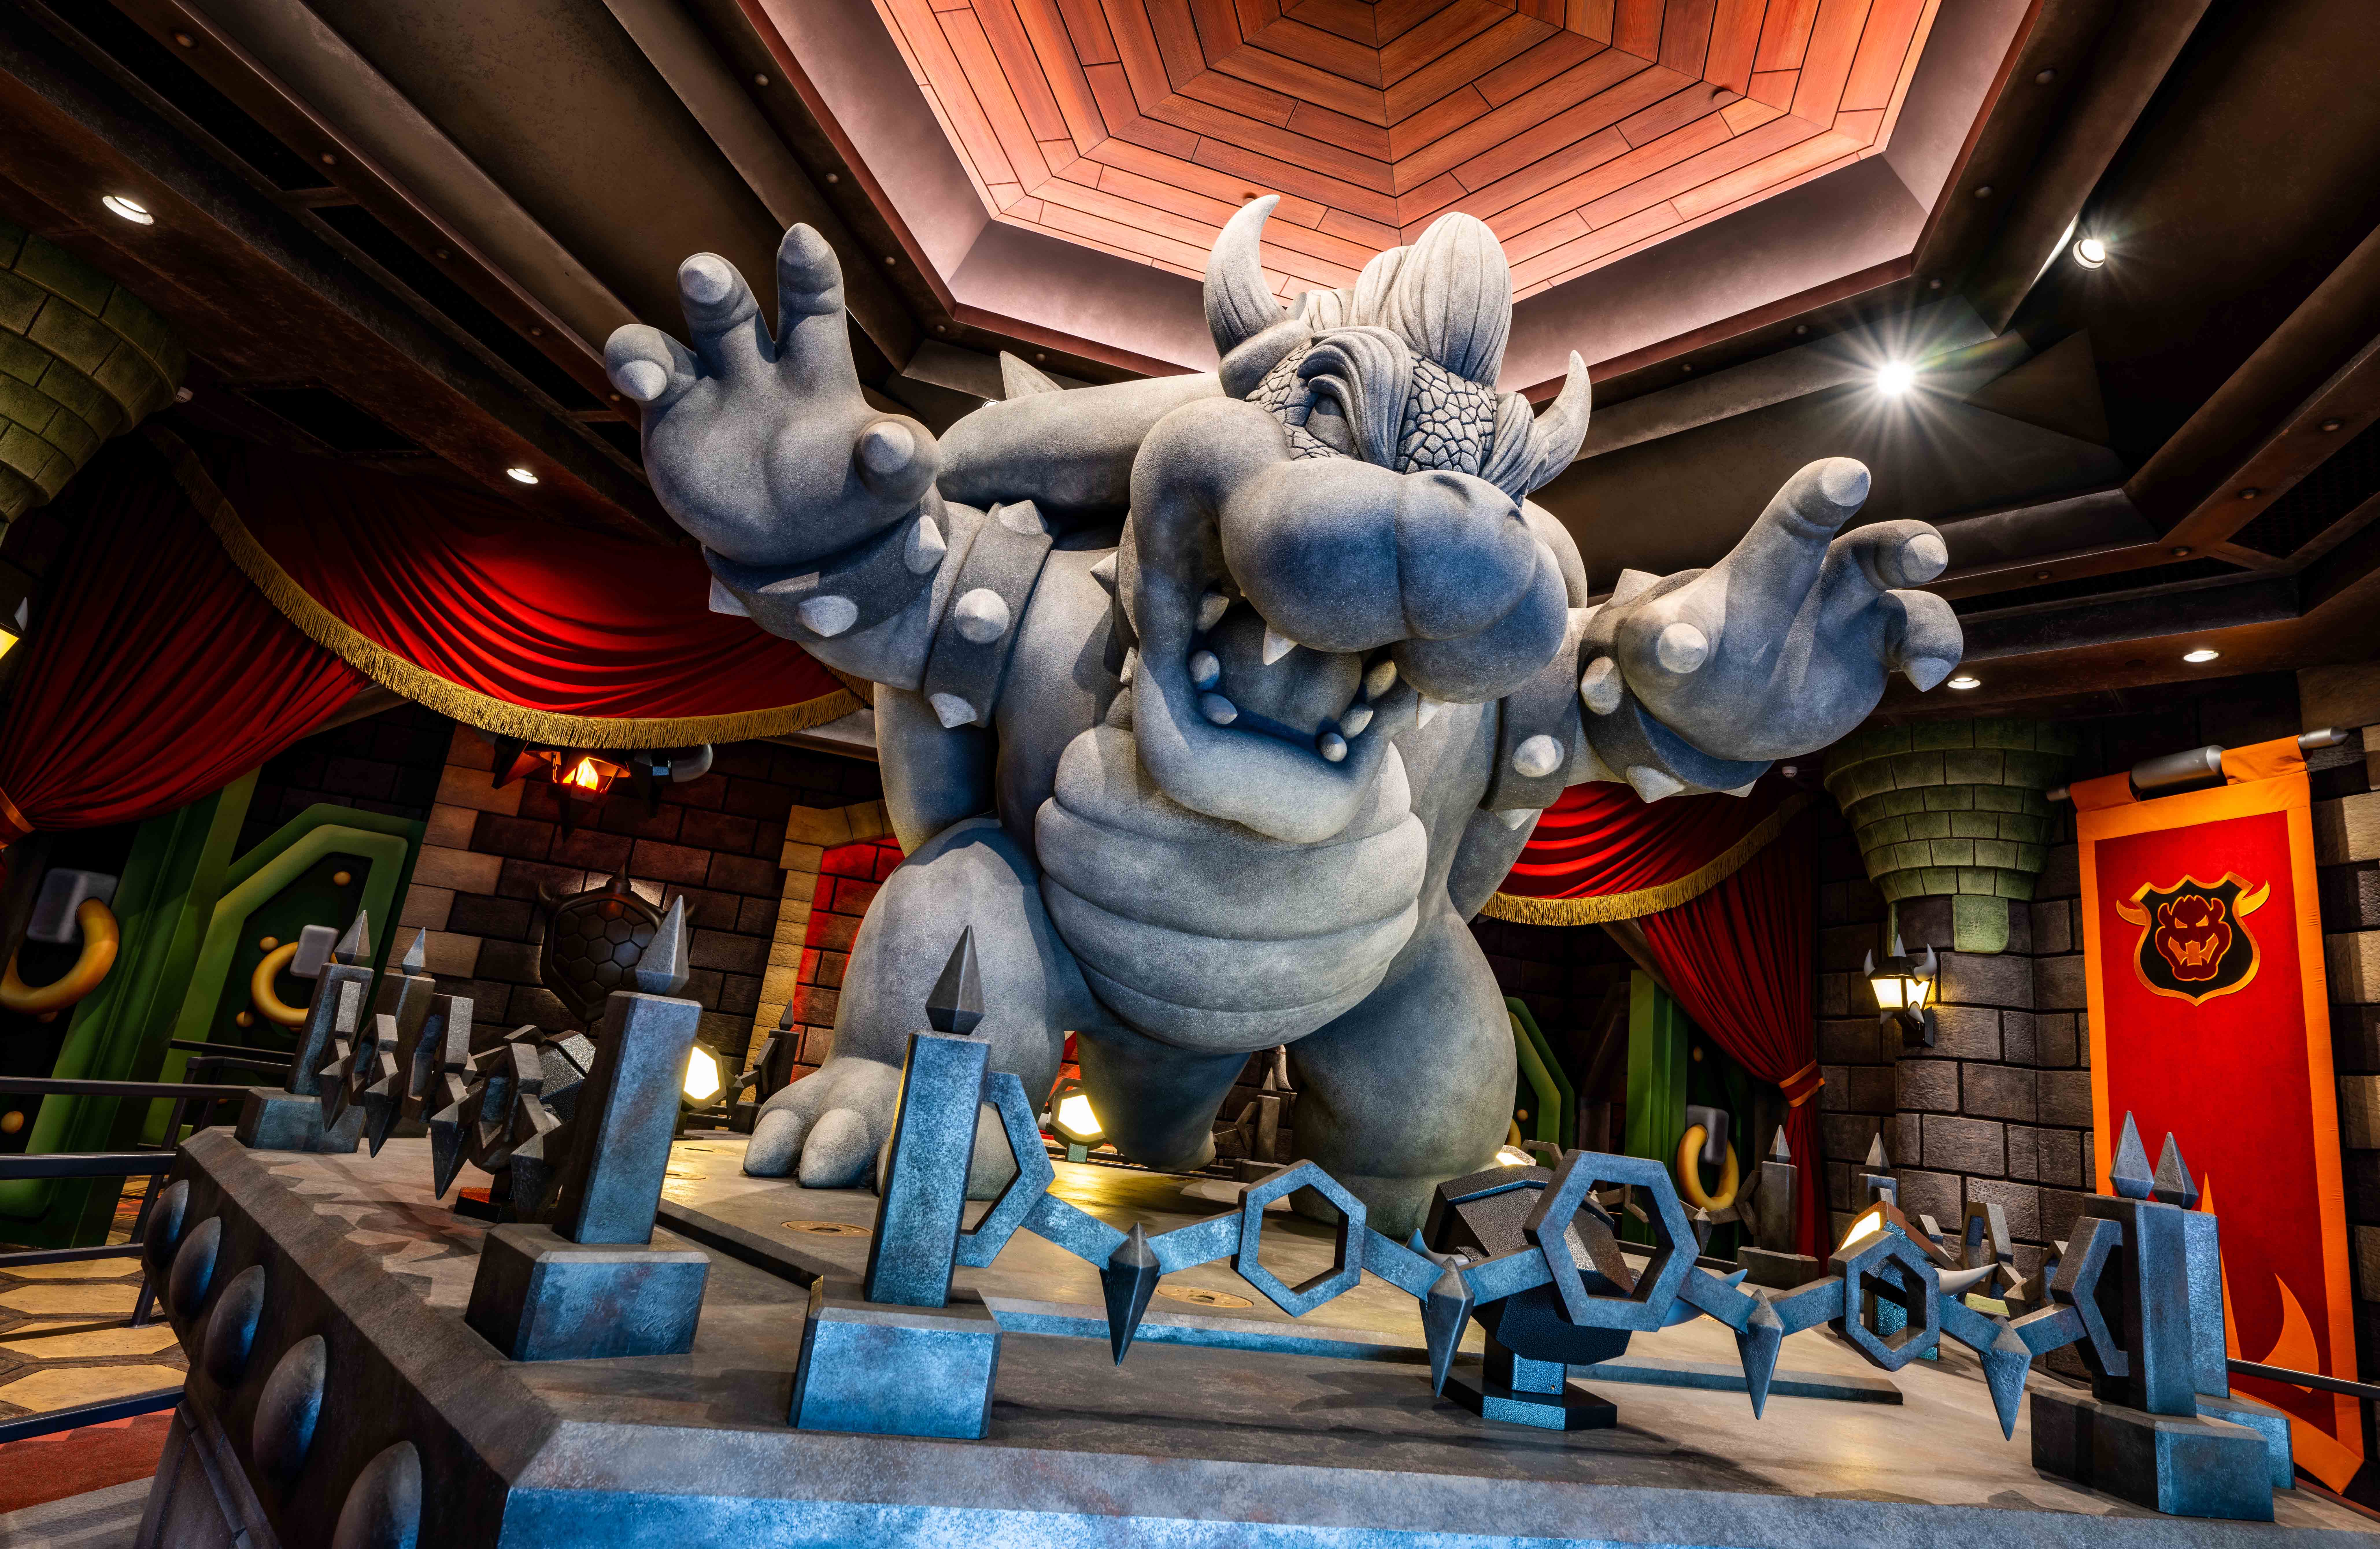 A statue of Bowser in front of his castle in the queue for Super Nintendo World’s attraction Mario Kart: Bowser’s Challenge.